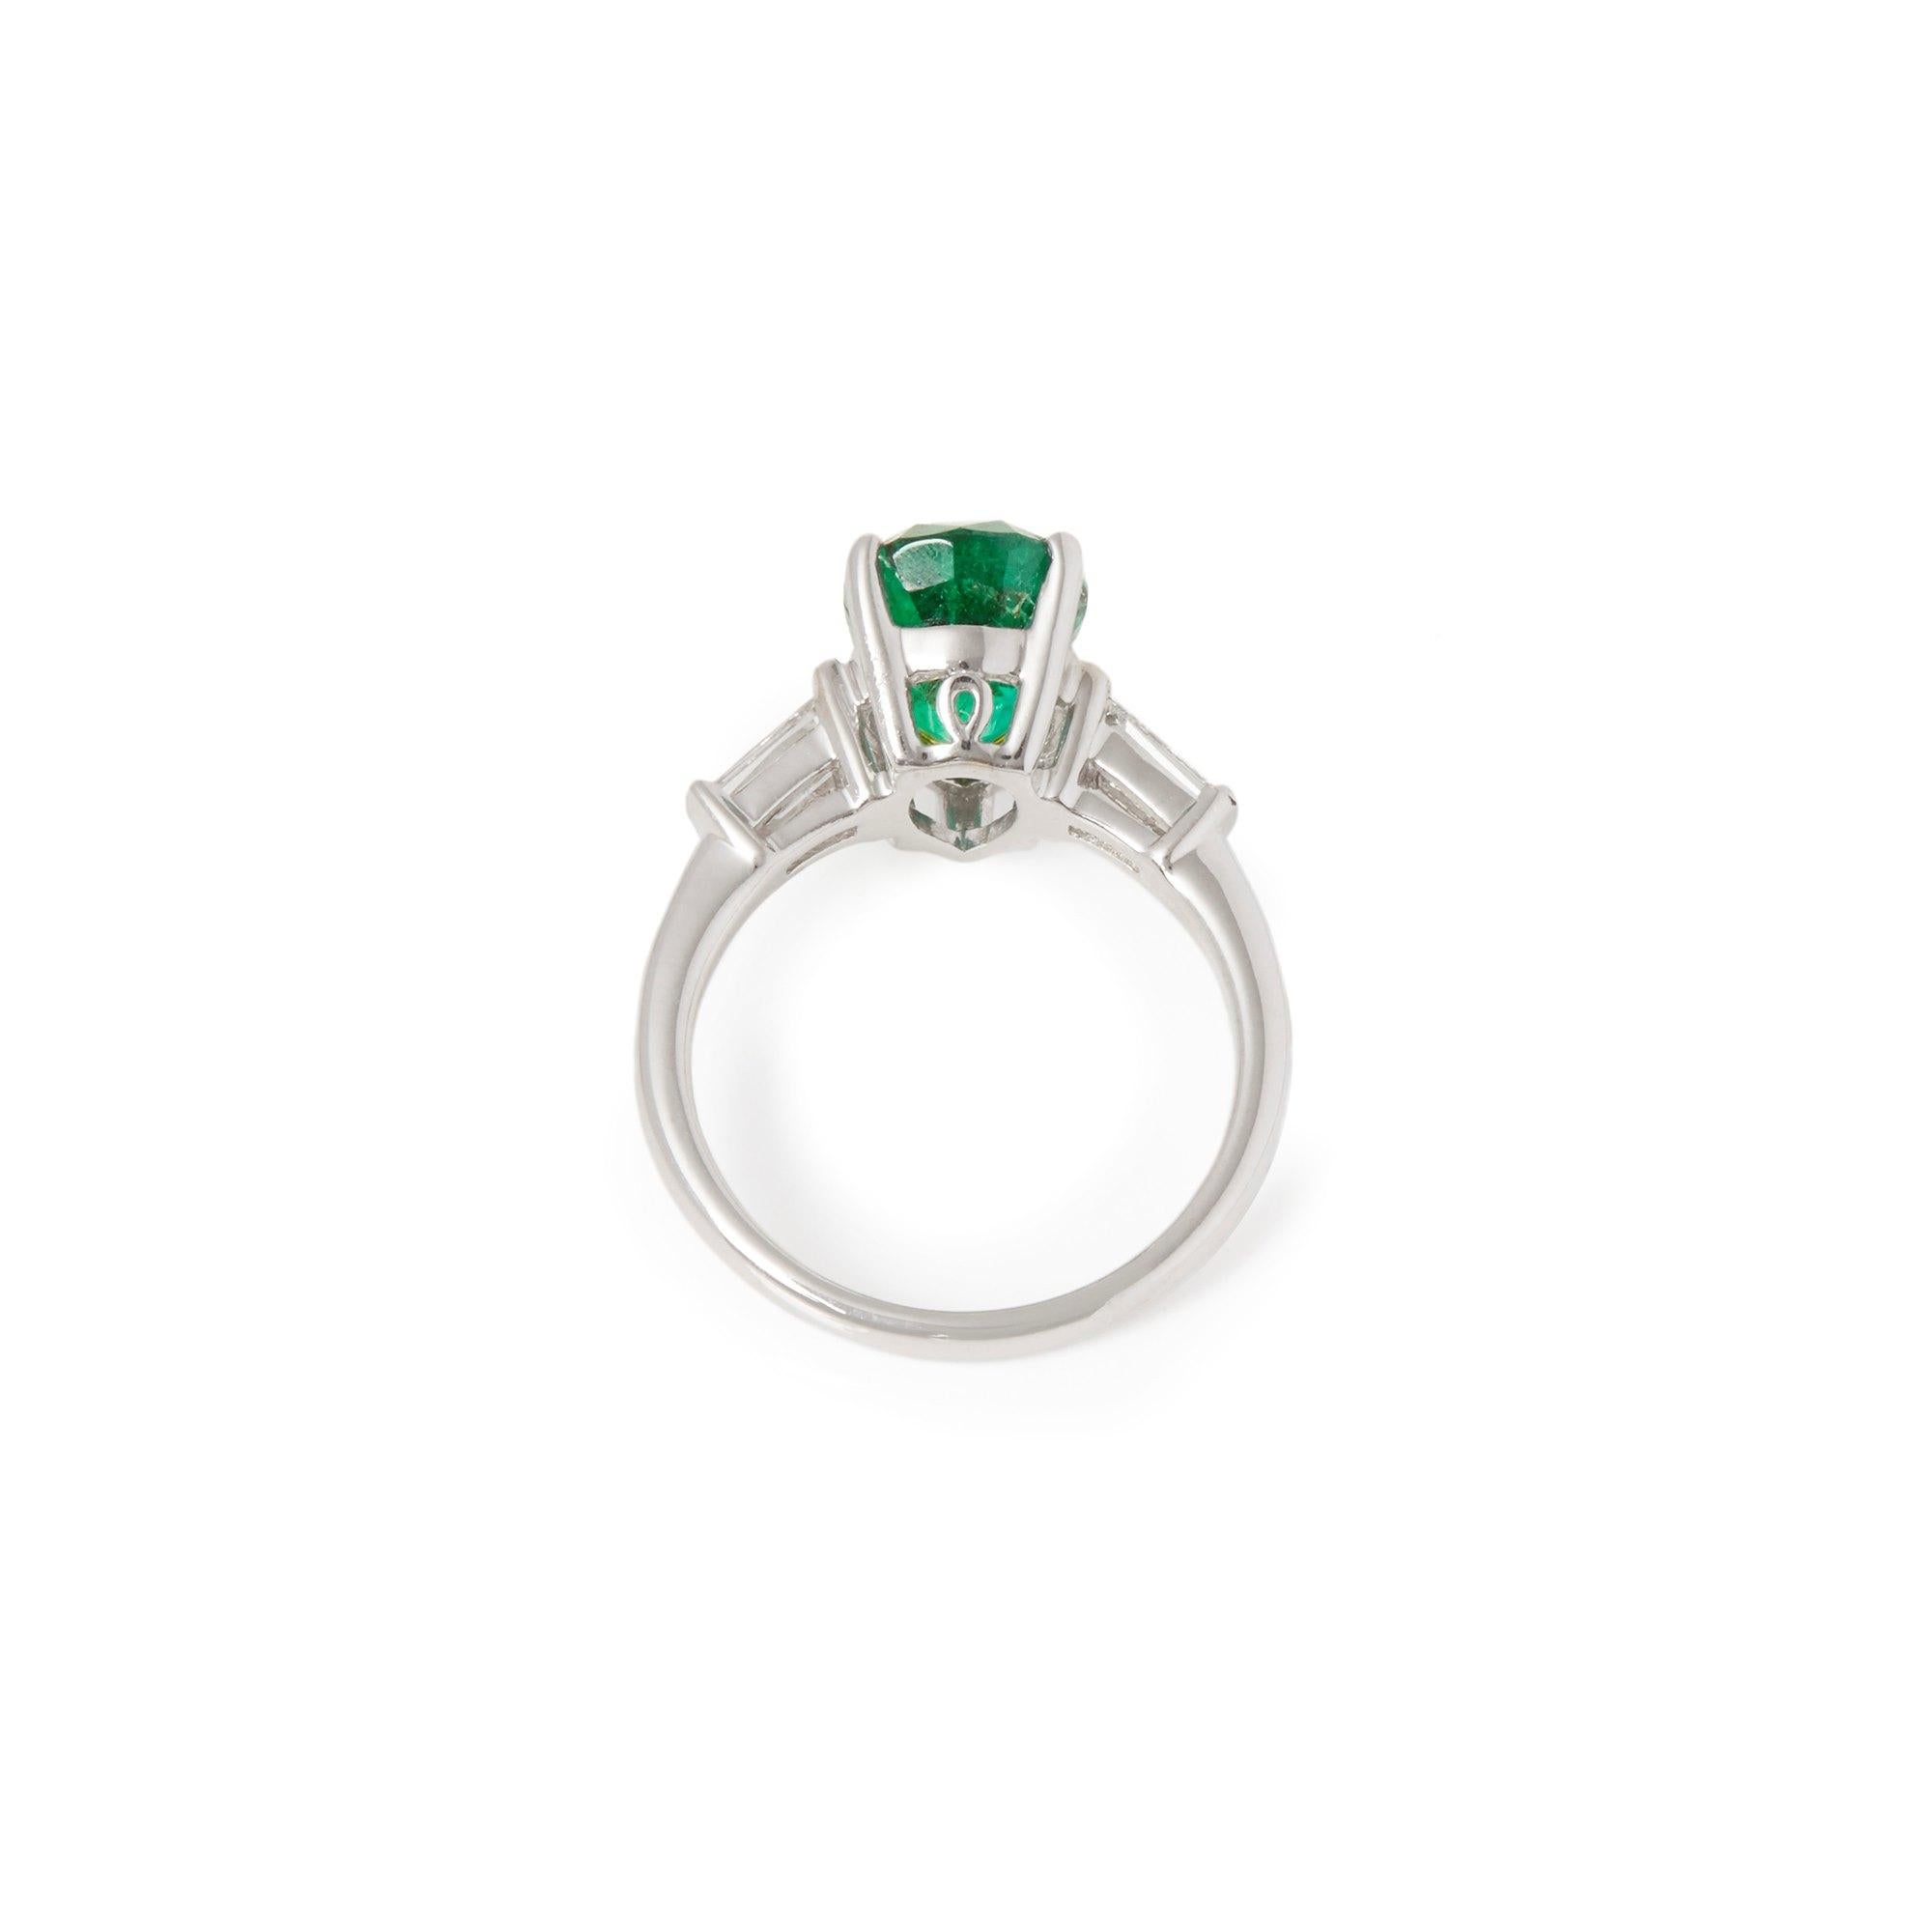 Certified 3.45ct Untreated Brazilian Pear Cut Emerald and Diamond 18ct gold Ring In Excellent Condition For Sale In Bishop's Stortford, Hertfordshire